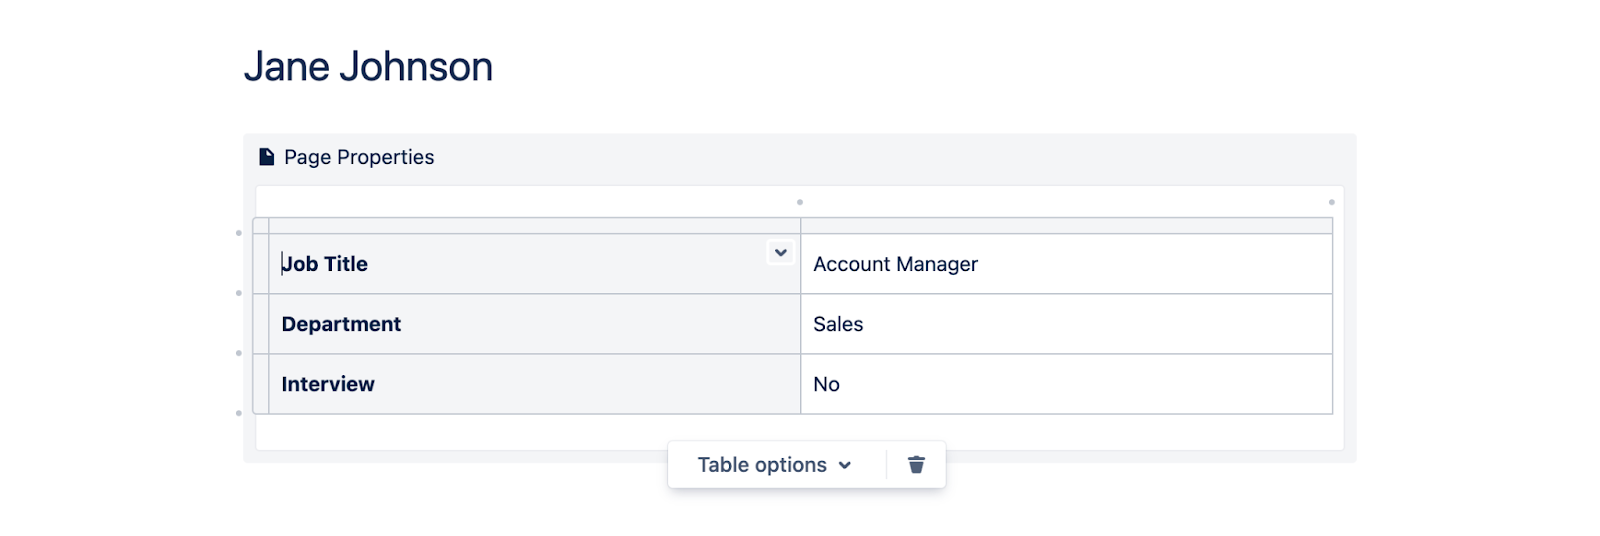 How To Organize New Job Applications in Confluence Cloud - page properties 2 columns